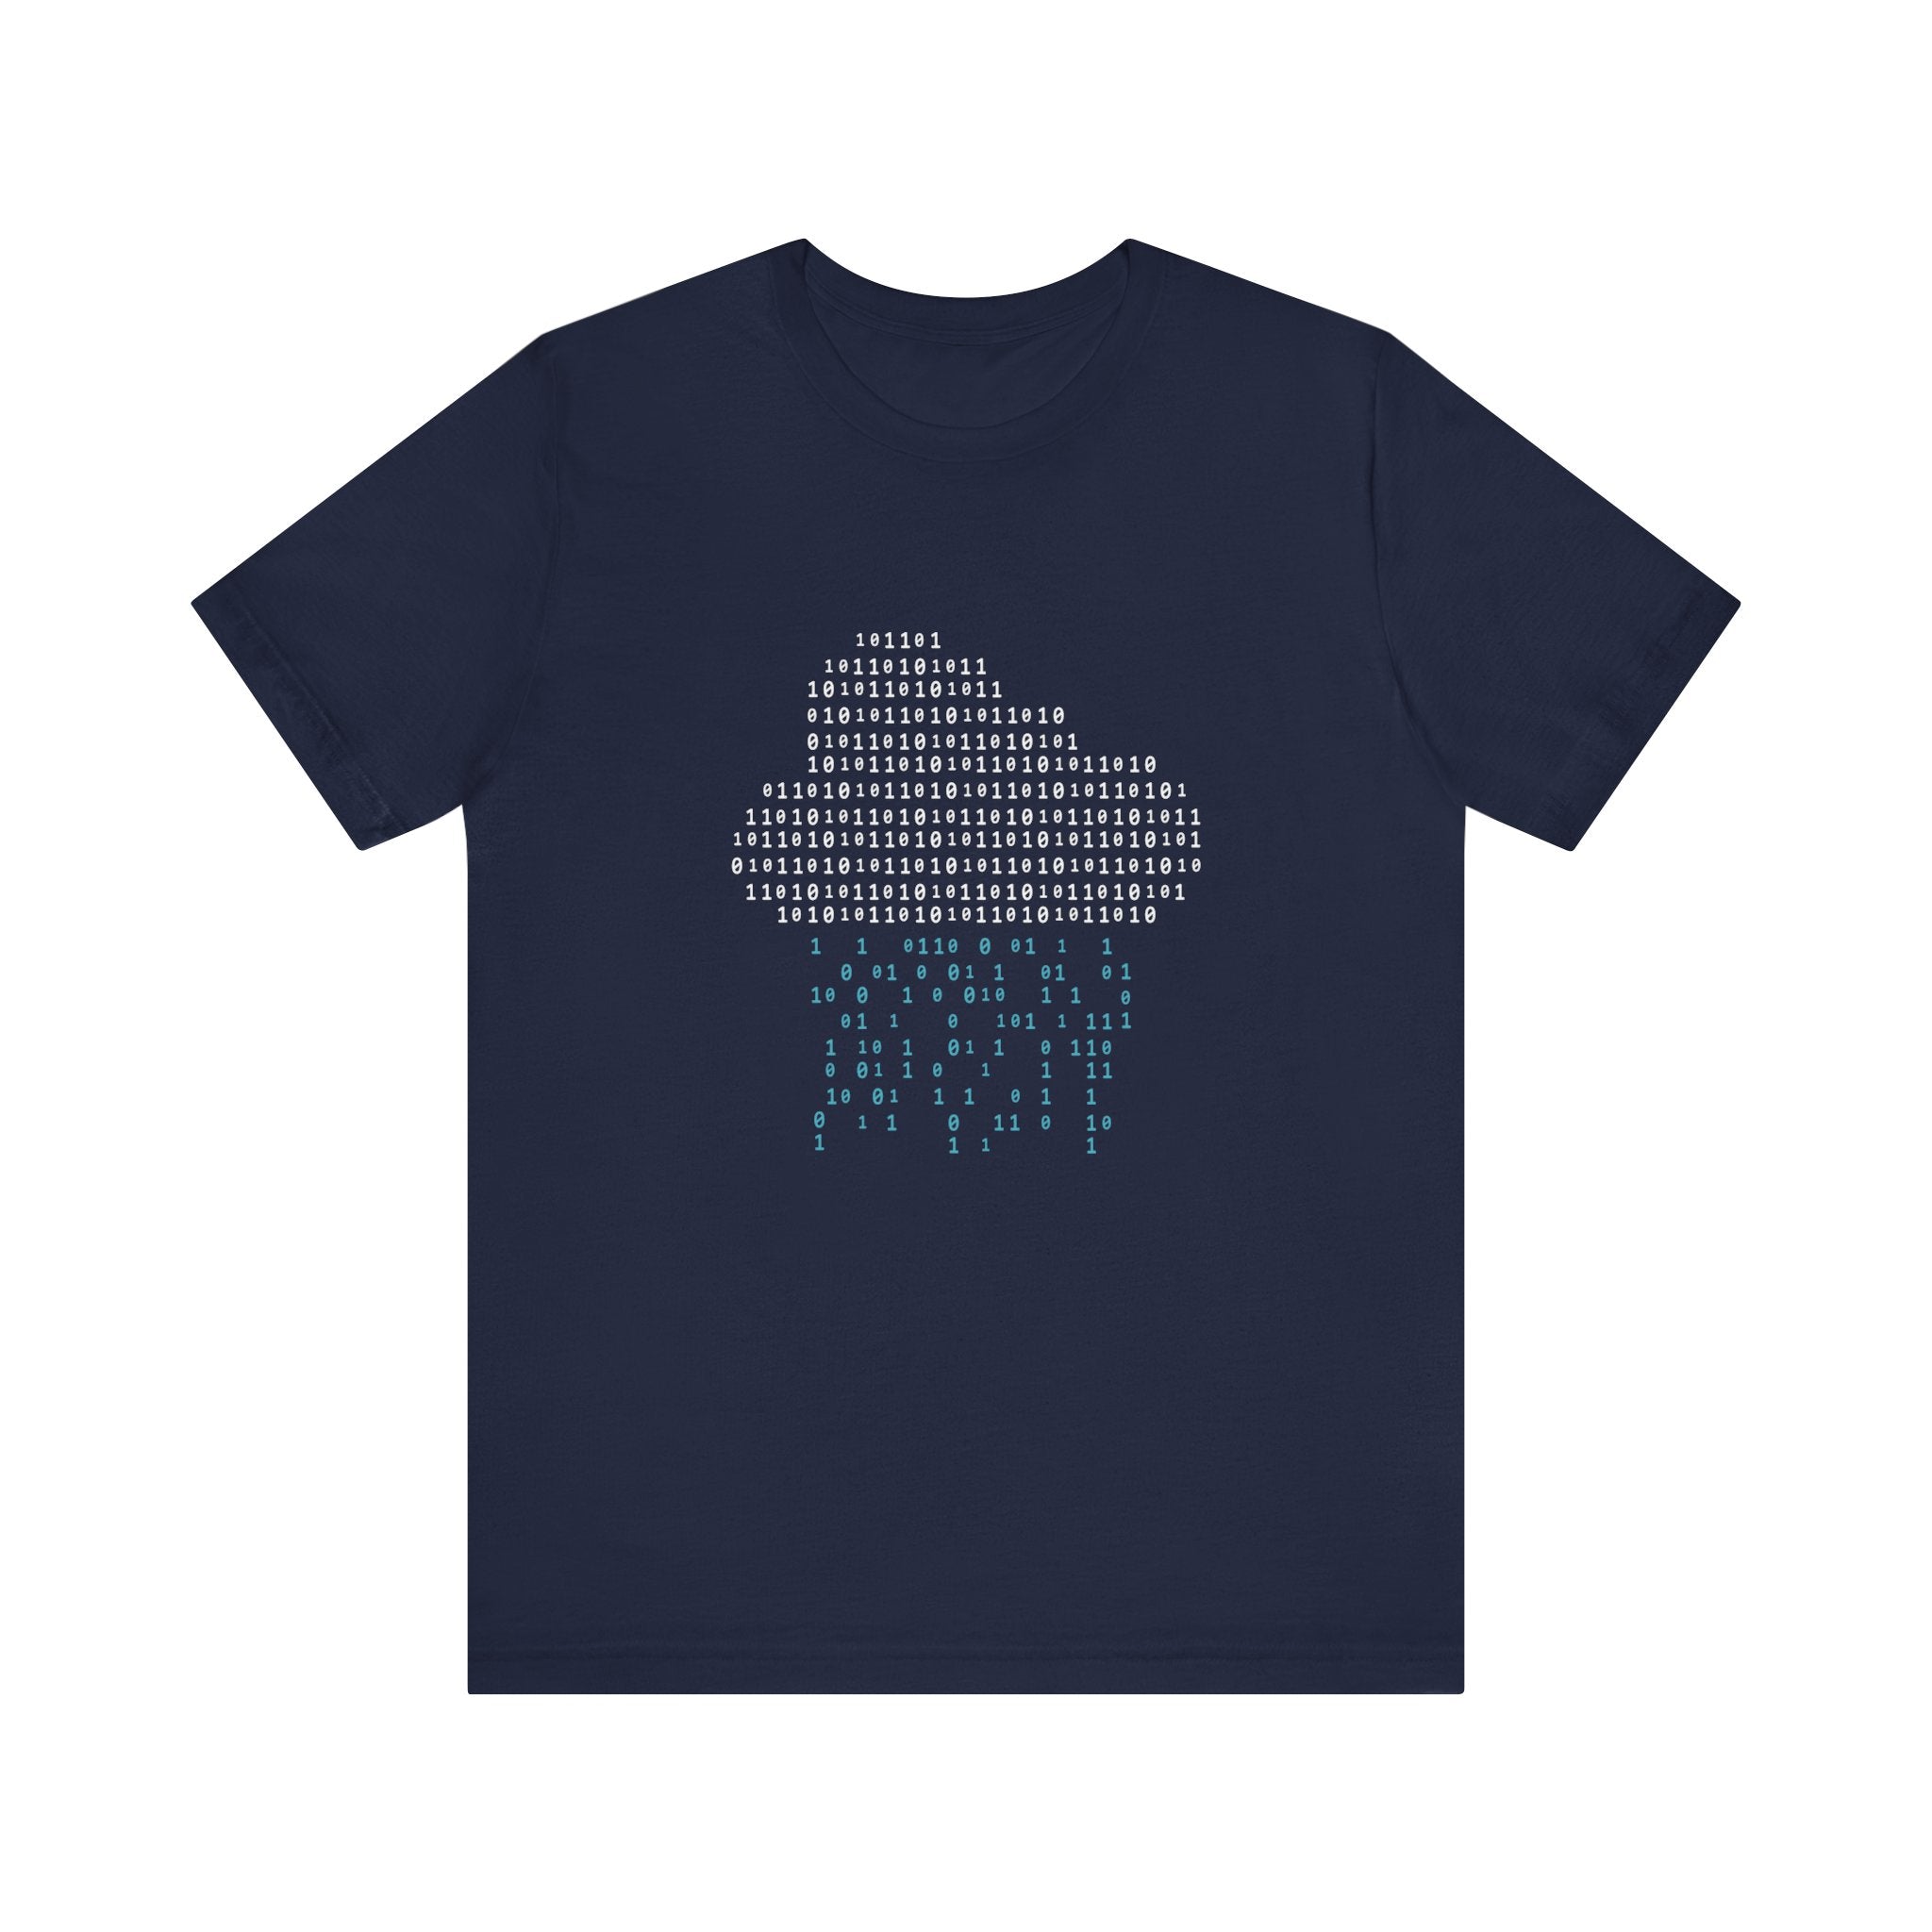 Navy blue Binary Rain Cloud - T-Shirt with a cloud made of binary code and binary rain printed on the front, crafted from Airlume combed, ring-spun cotton. Perfect for tech enthusiasts who appreciate style and comfort.